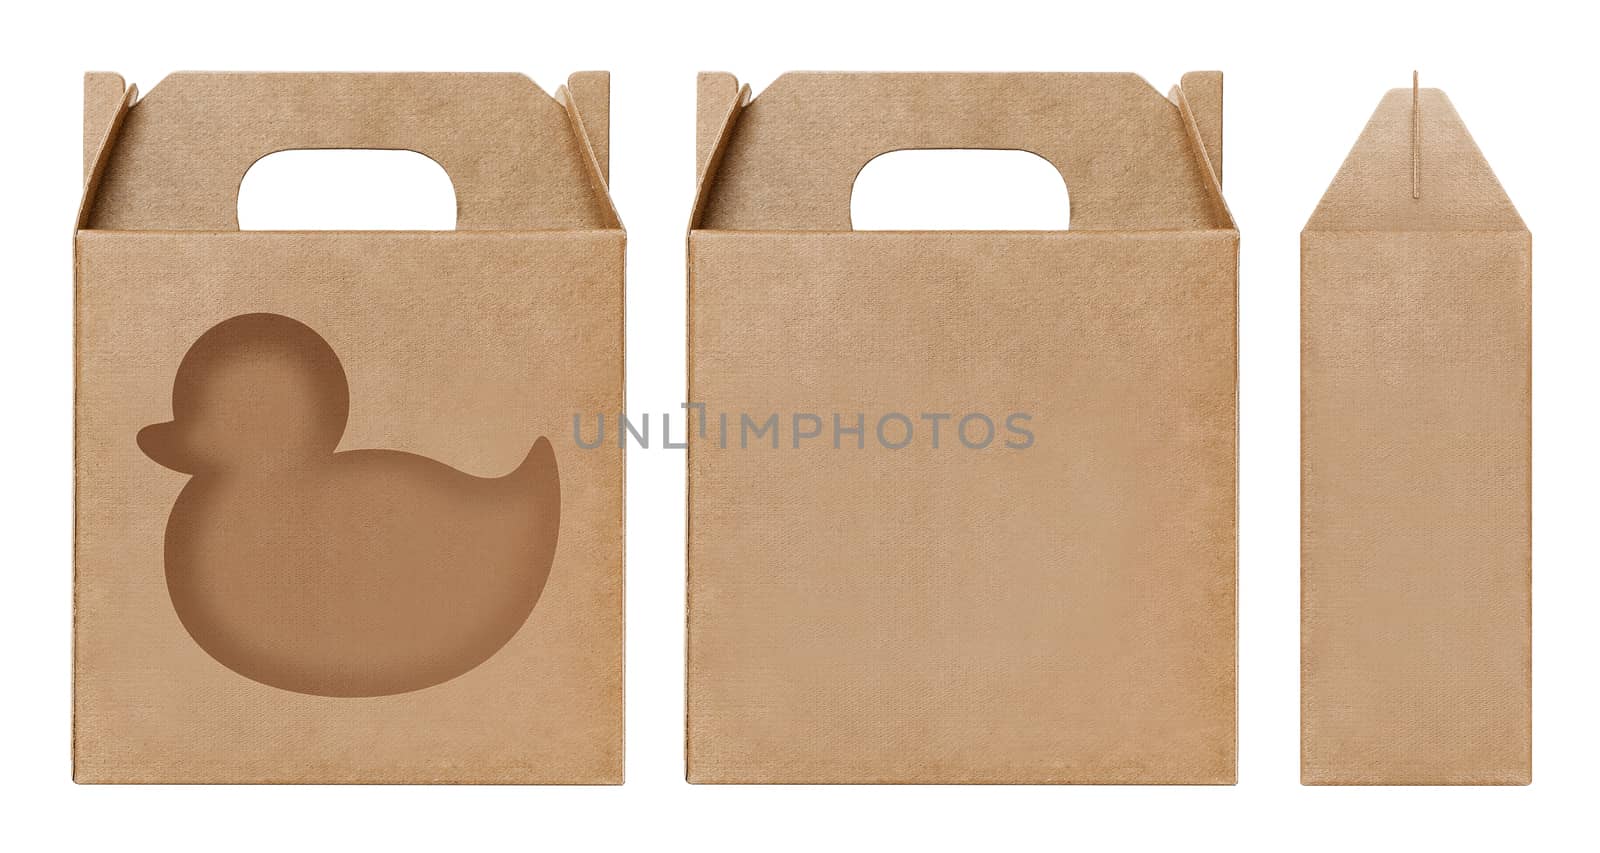 Box brown window Duck shape cut out Packaging template, Empty kraft Box Cardboard isolated white background, Boxes Paper kraft natural material, Gift Box Brown Paper from Industrial Packaging carton by cgdeaw